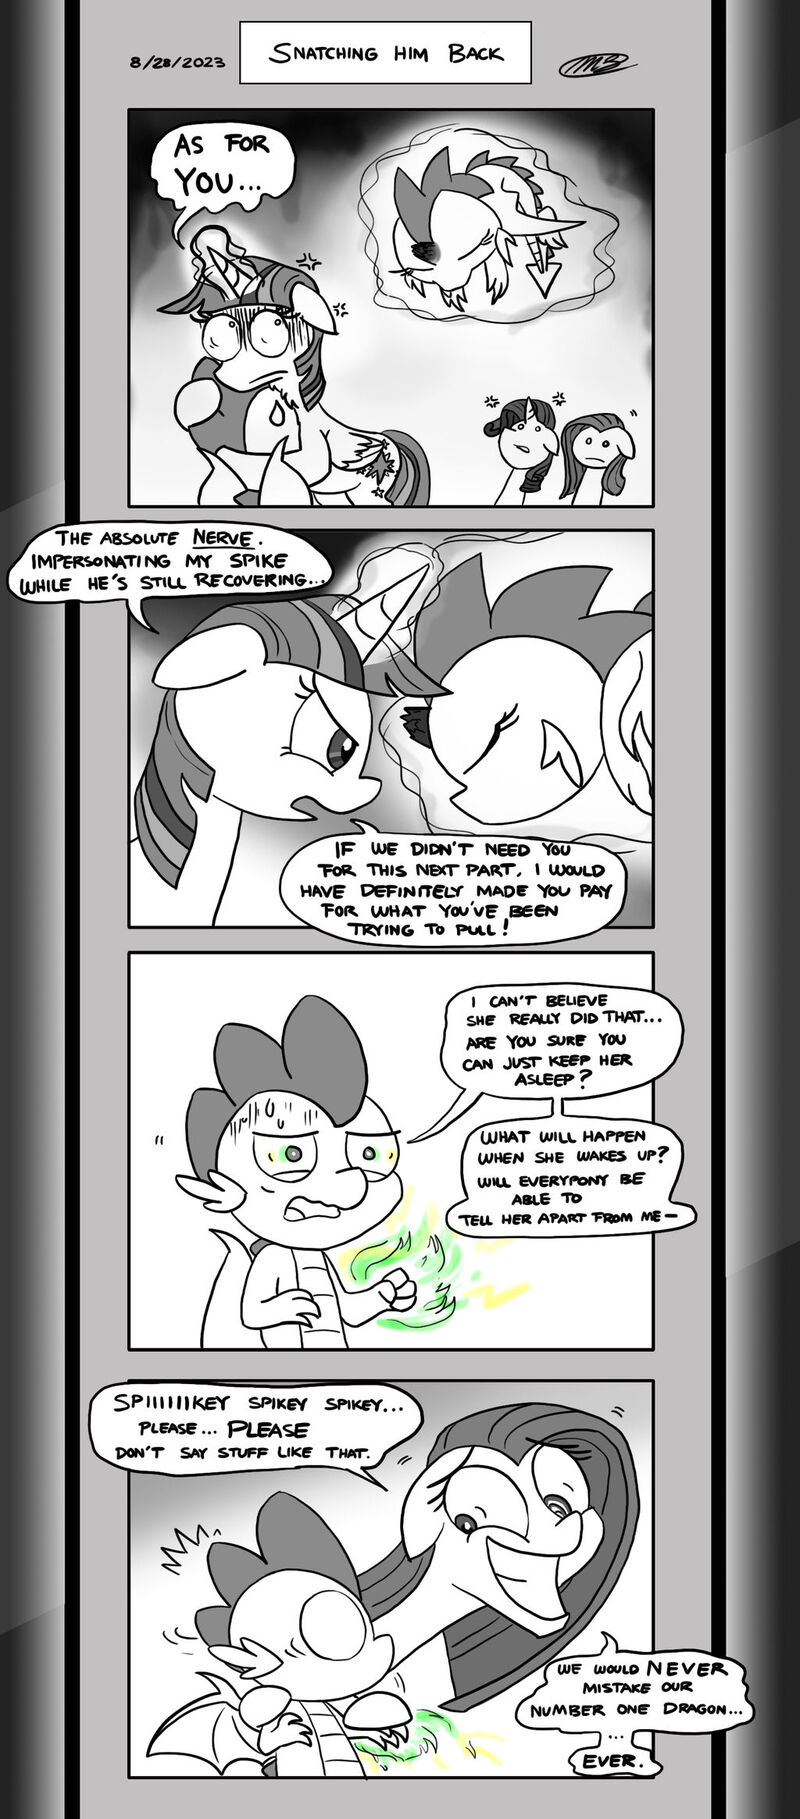 Page 10: Snatching Him